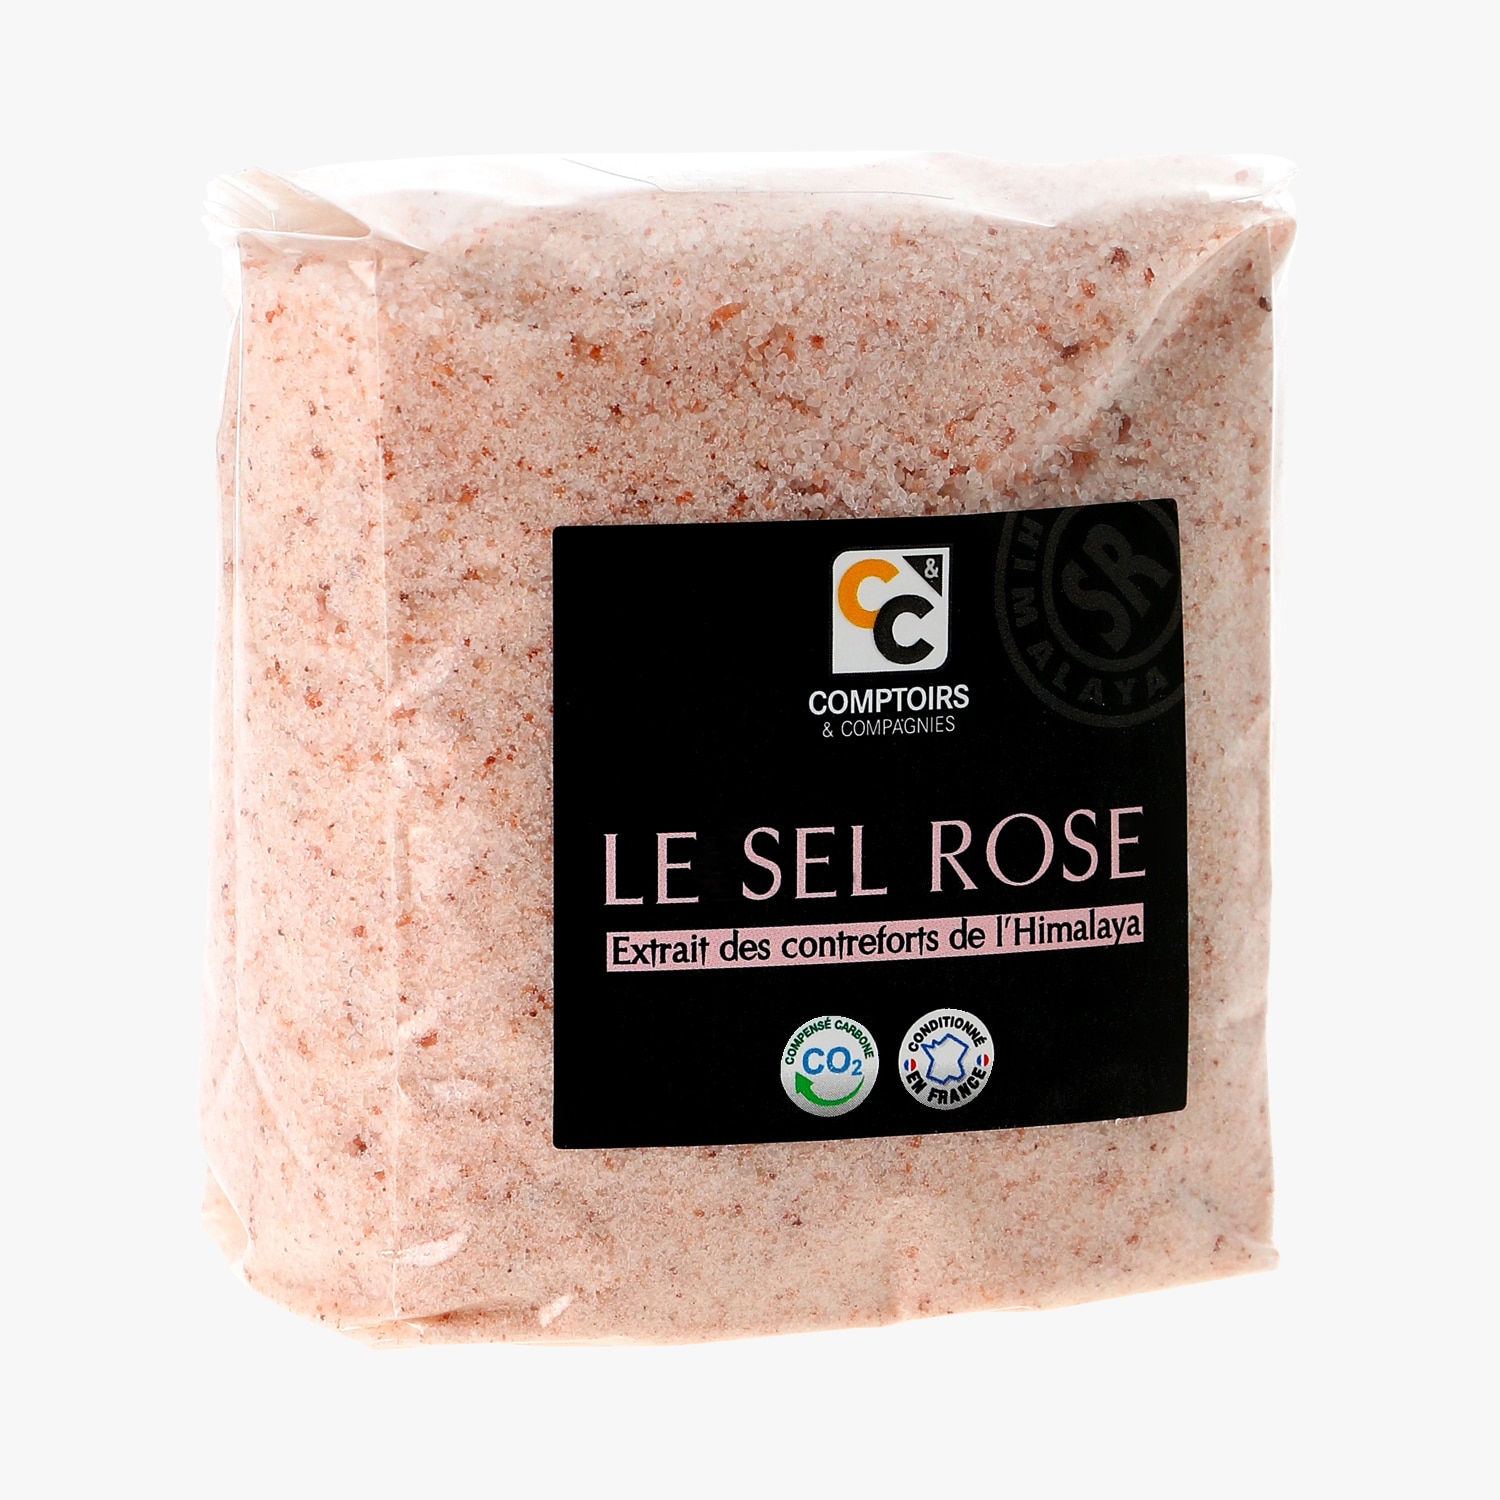 Le sel rose - Comptoirs et Compagnies